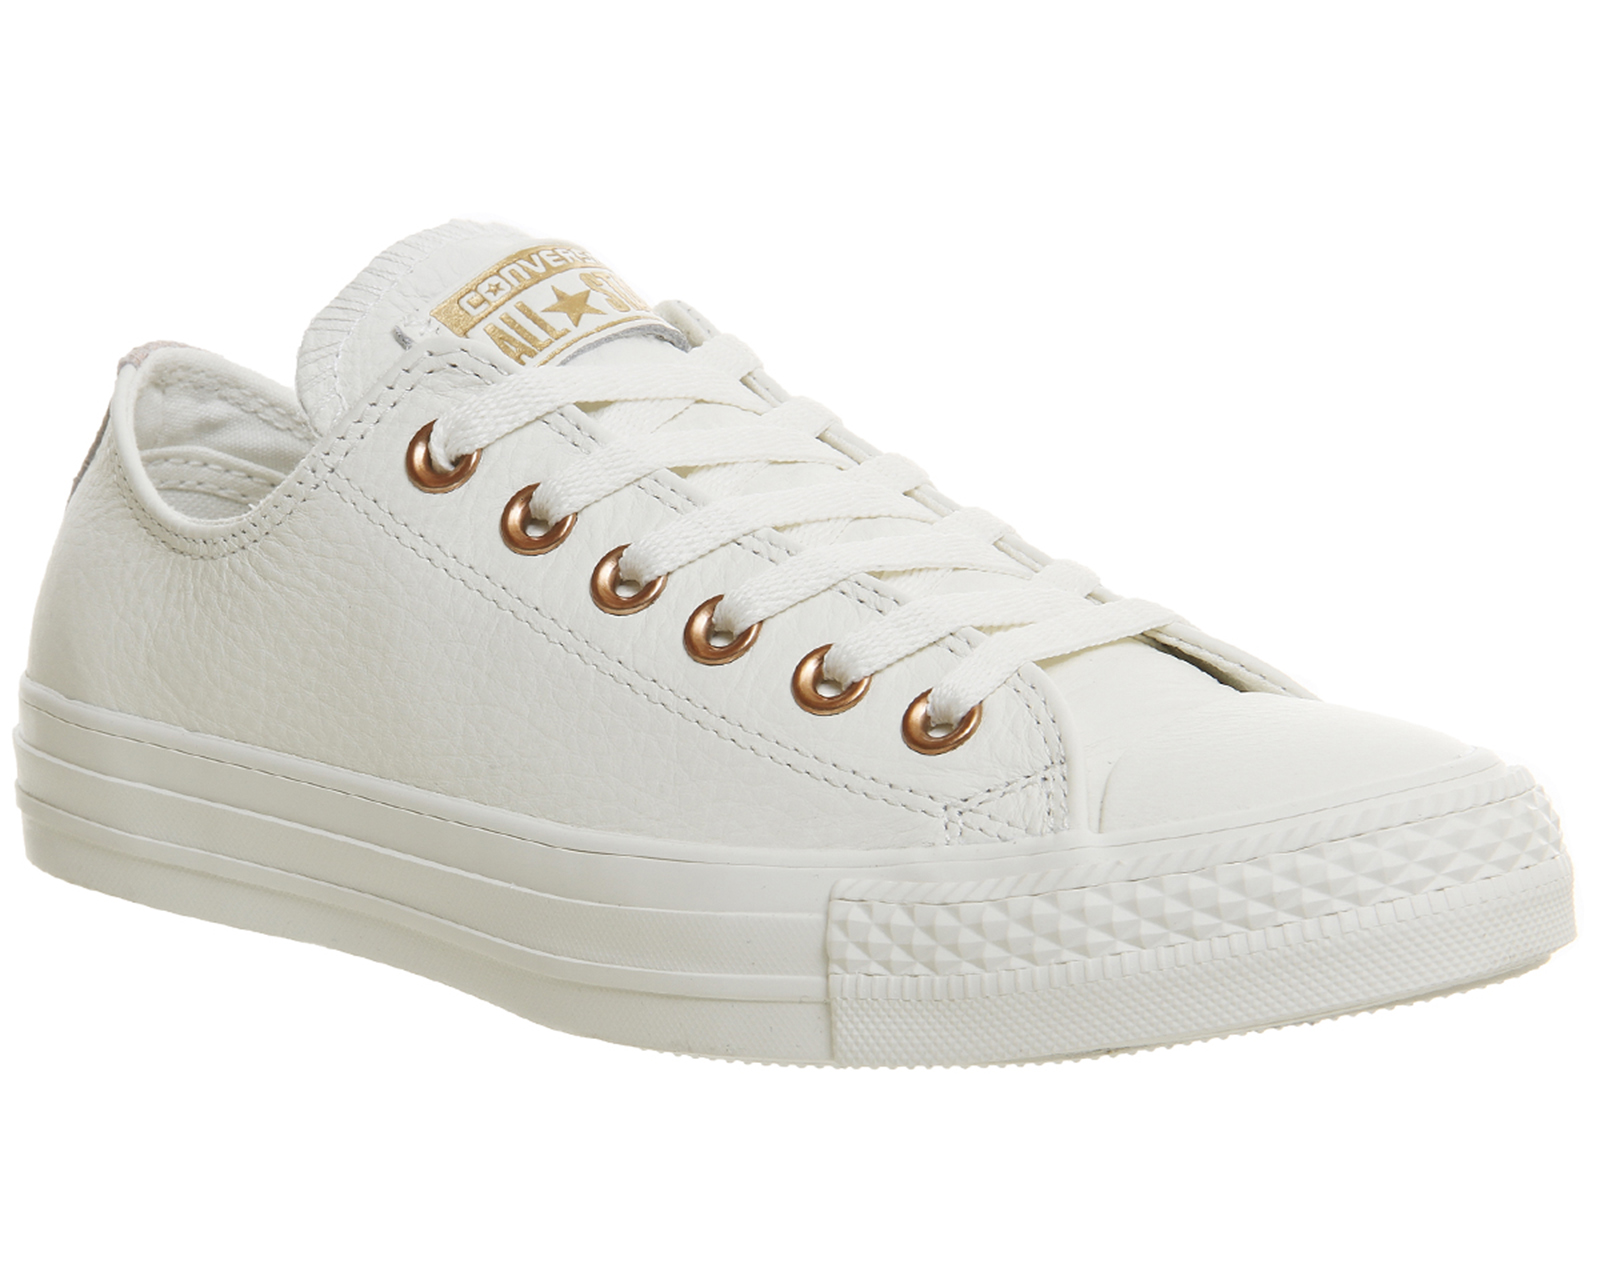 white and gold converse leather